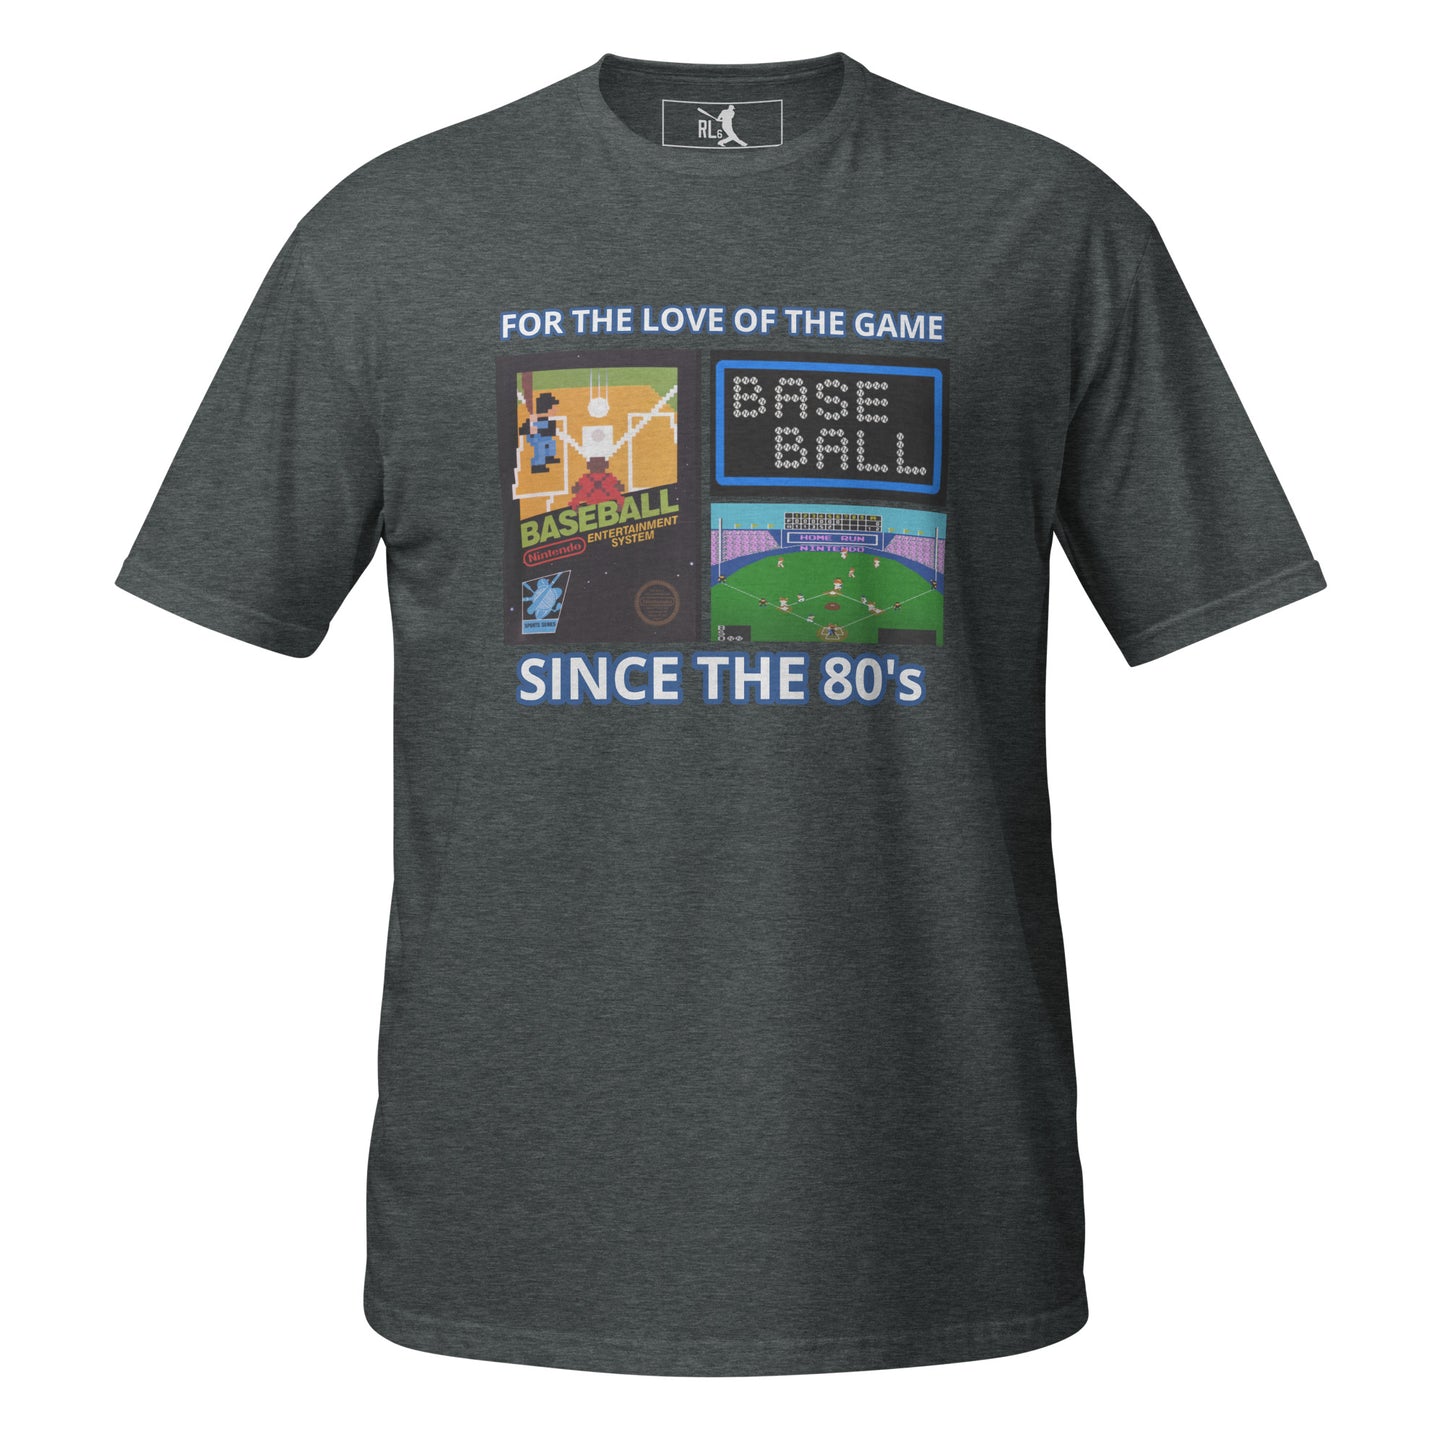 RL6 T-shirt Unisexe - For The Love Of The Game sinc the 80's